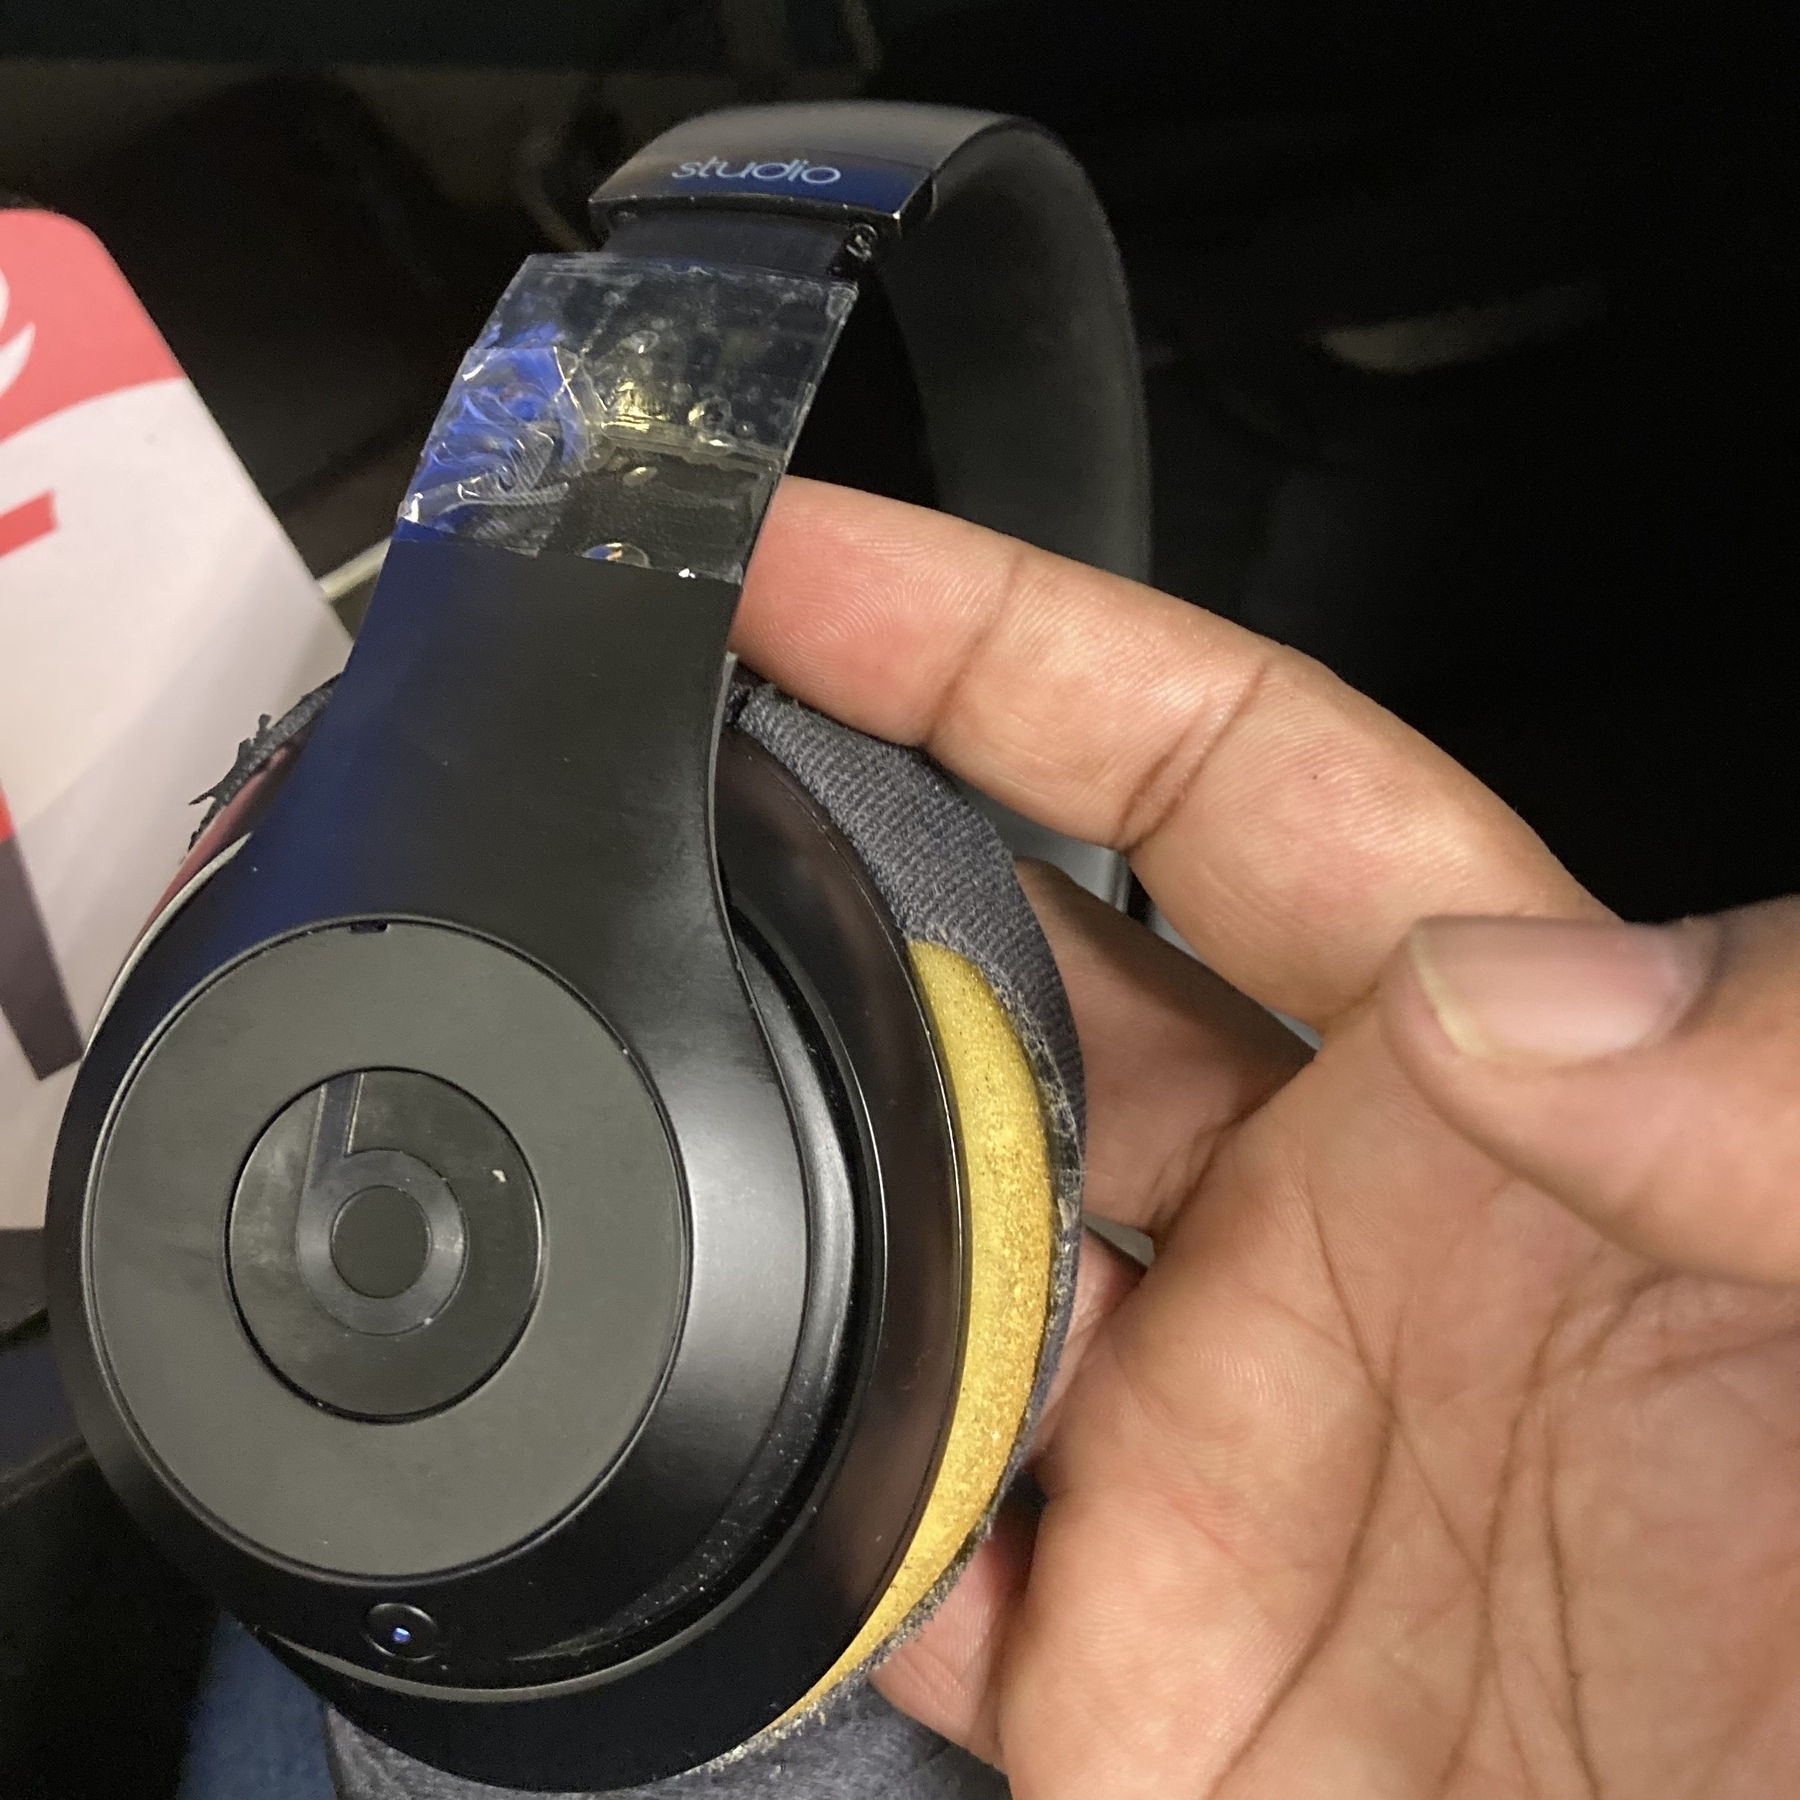 Beat headphones with tape and ripped padding. 